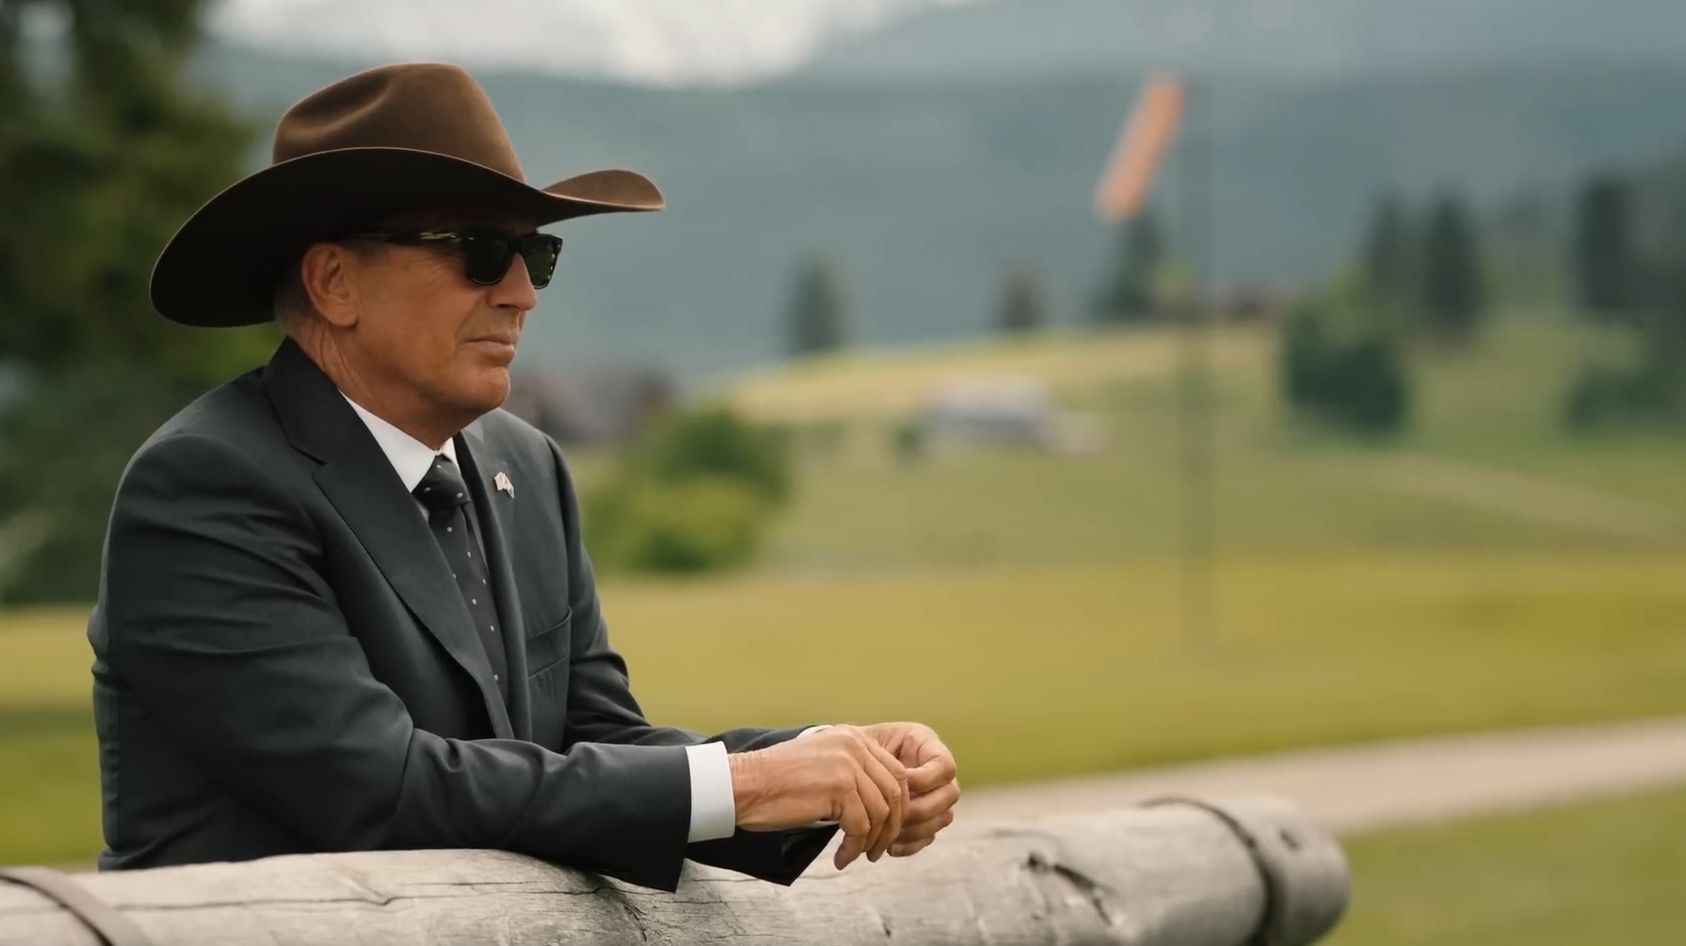 Yellowstone Season 5 Return Date Revealed: When Final Episodes Will Air